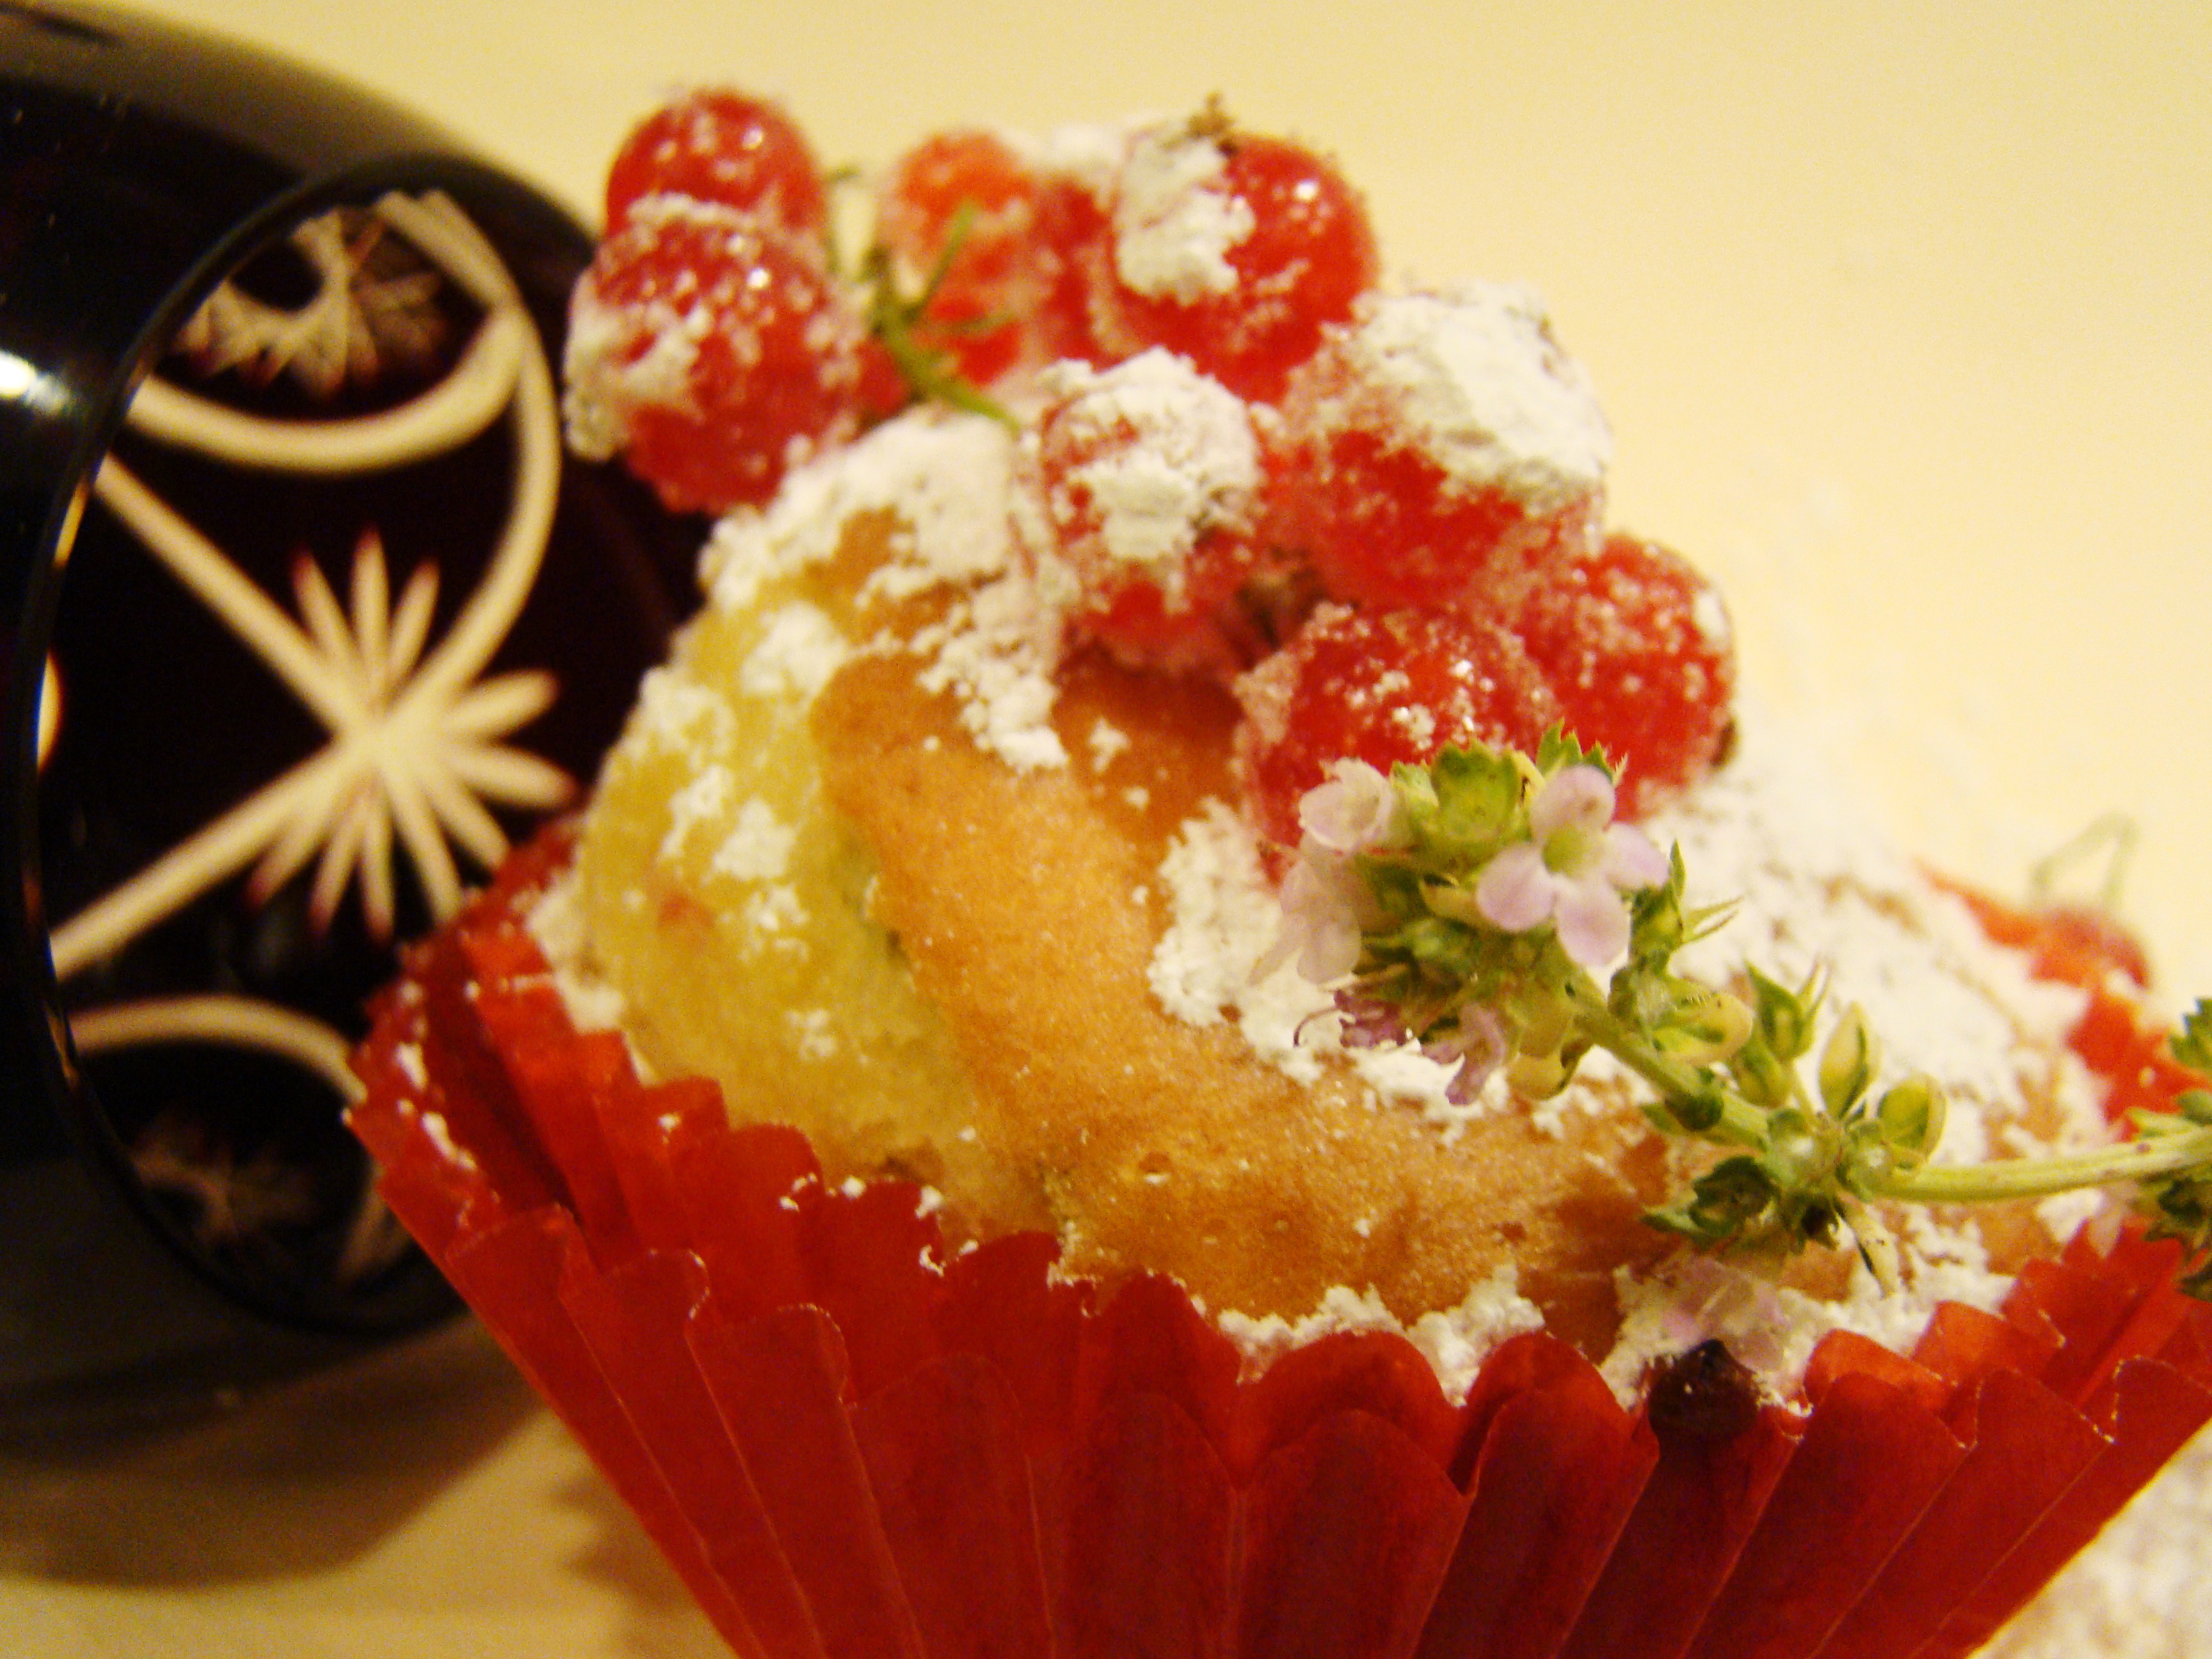 Lemon Thyme with Red Current Cupcake